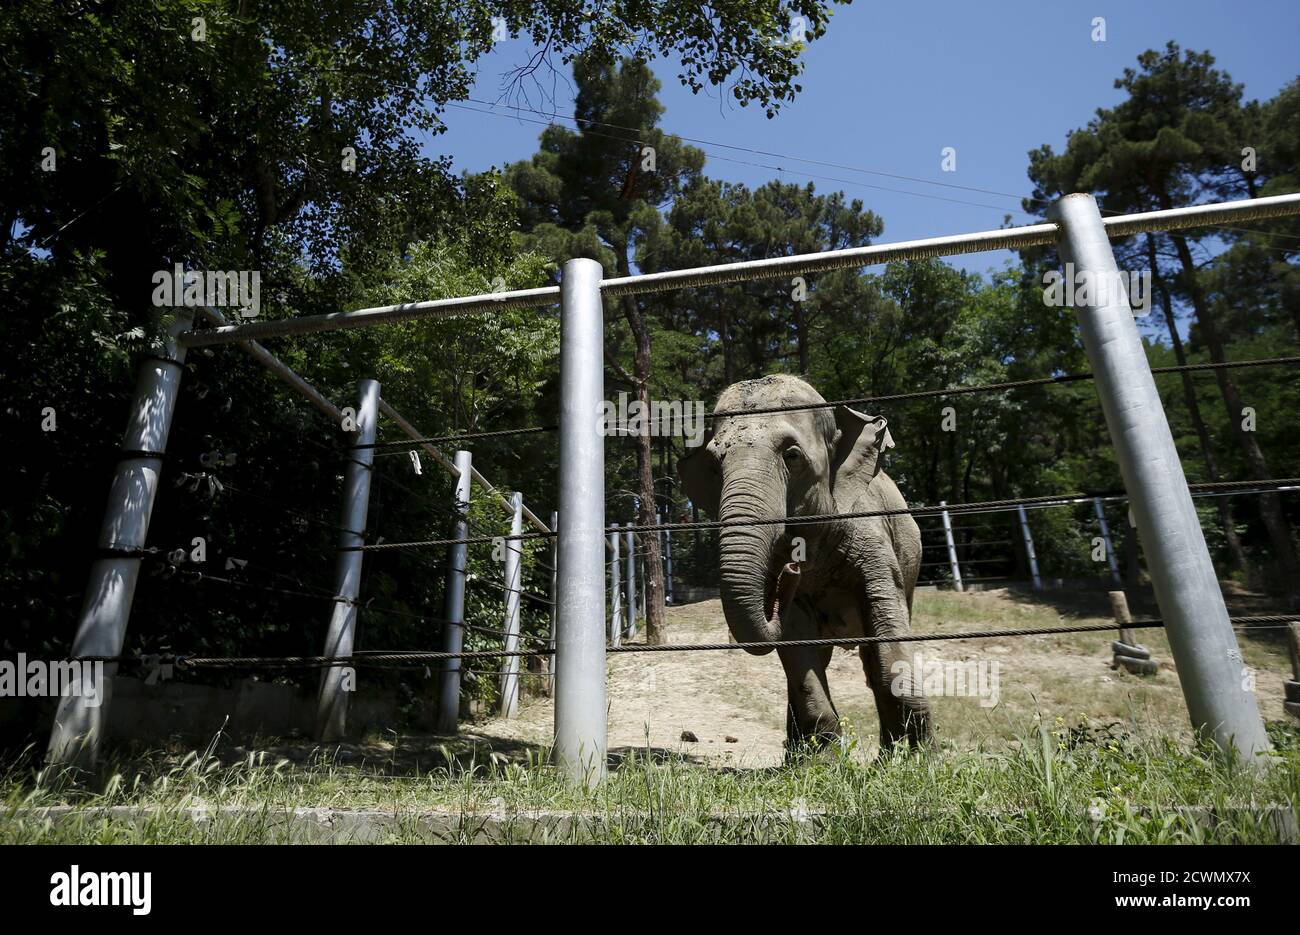 An elephant is seen inside its enclosure at a zoo, which is partially  destroyed, in Tbilisi, Georgia, June 18, 2015. A tiger, one of dozens of  animals that escaped after floods destroyed